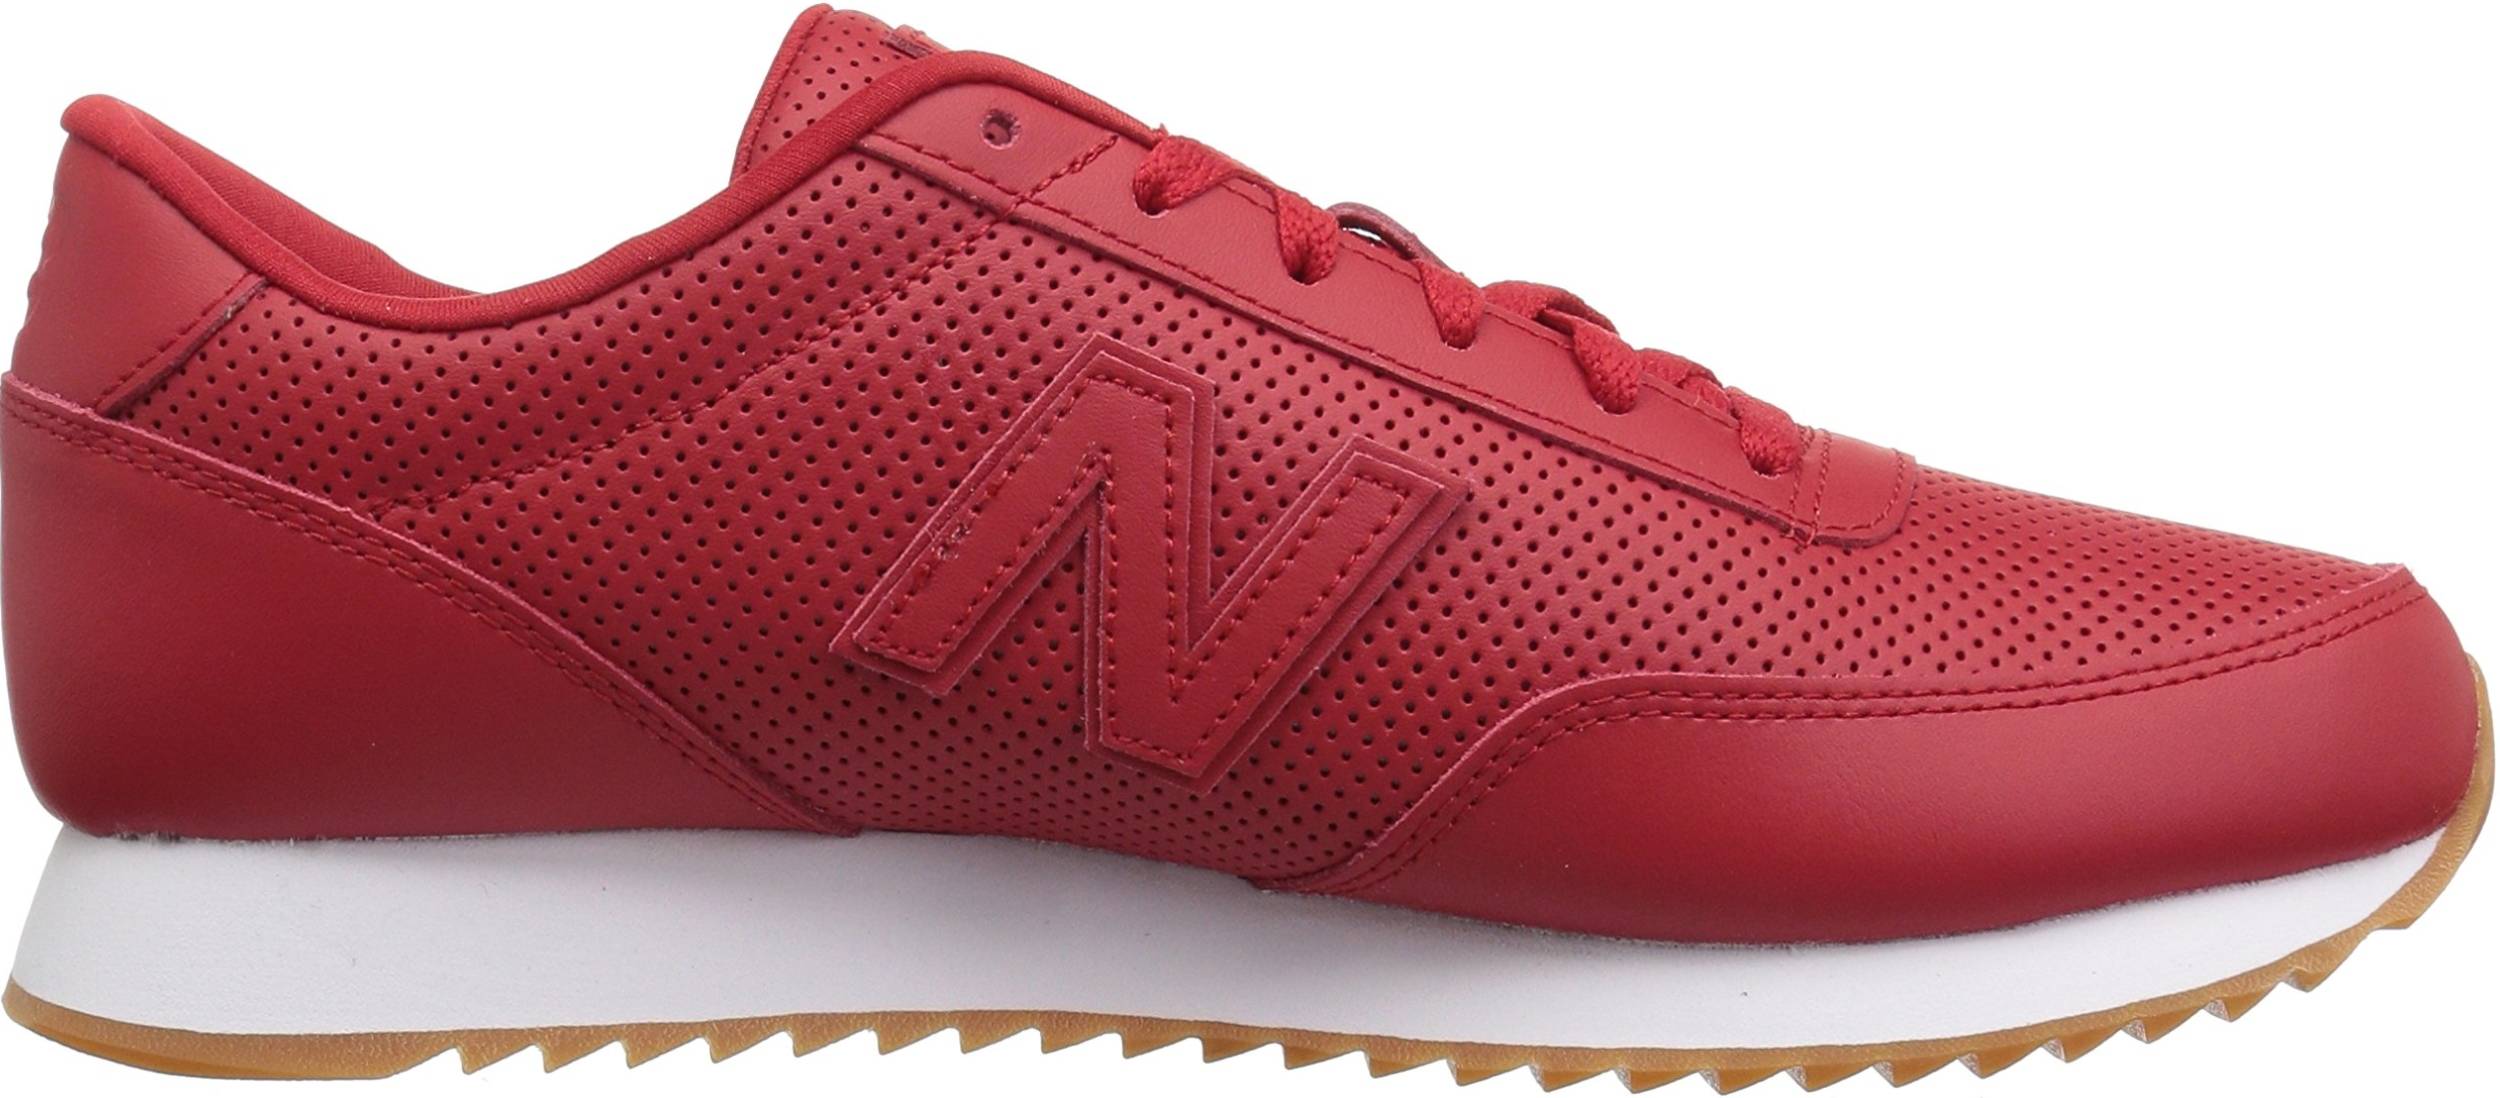 Only £66 + Review of New Balance 501 